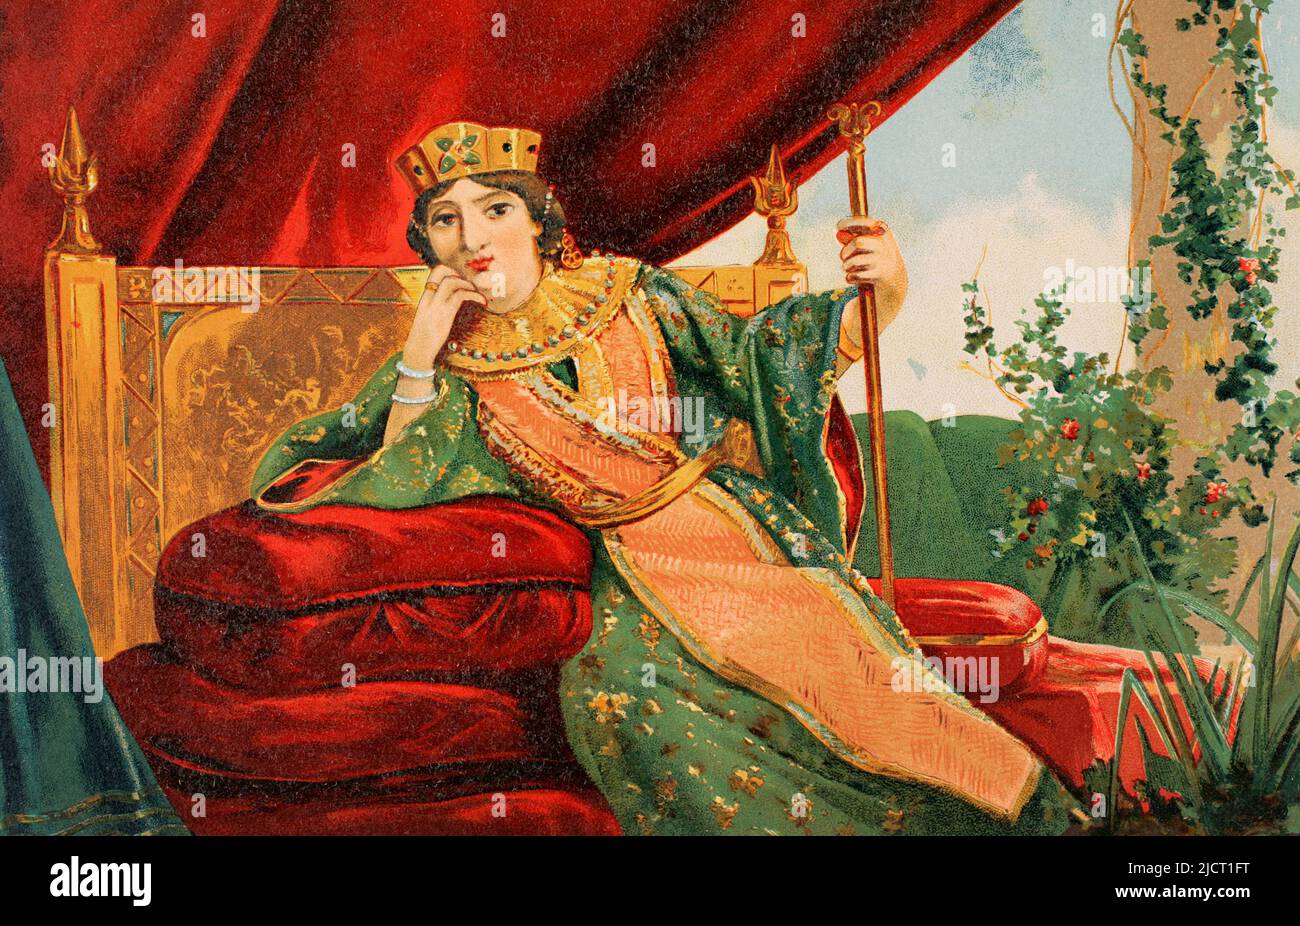 Theodora (ca. 815-867). Empress of Byzantium (830-842) by marriage to Emperor Theophilus. Regent from 842 to 856. Chromolithography. 'Historia Universal' (Universal History), by César Cantú. Volume V. Published in Barcelona, 1884. Stock Photo